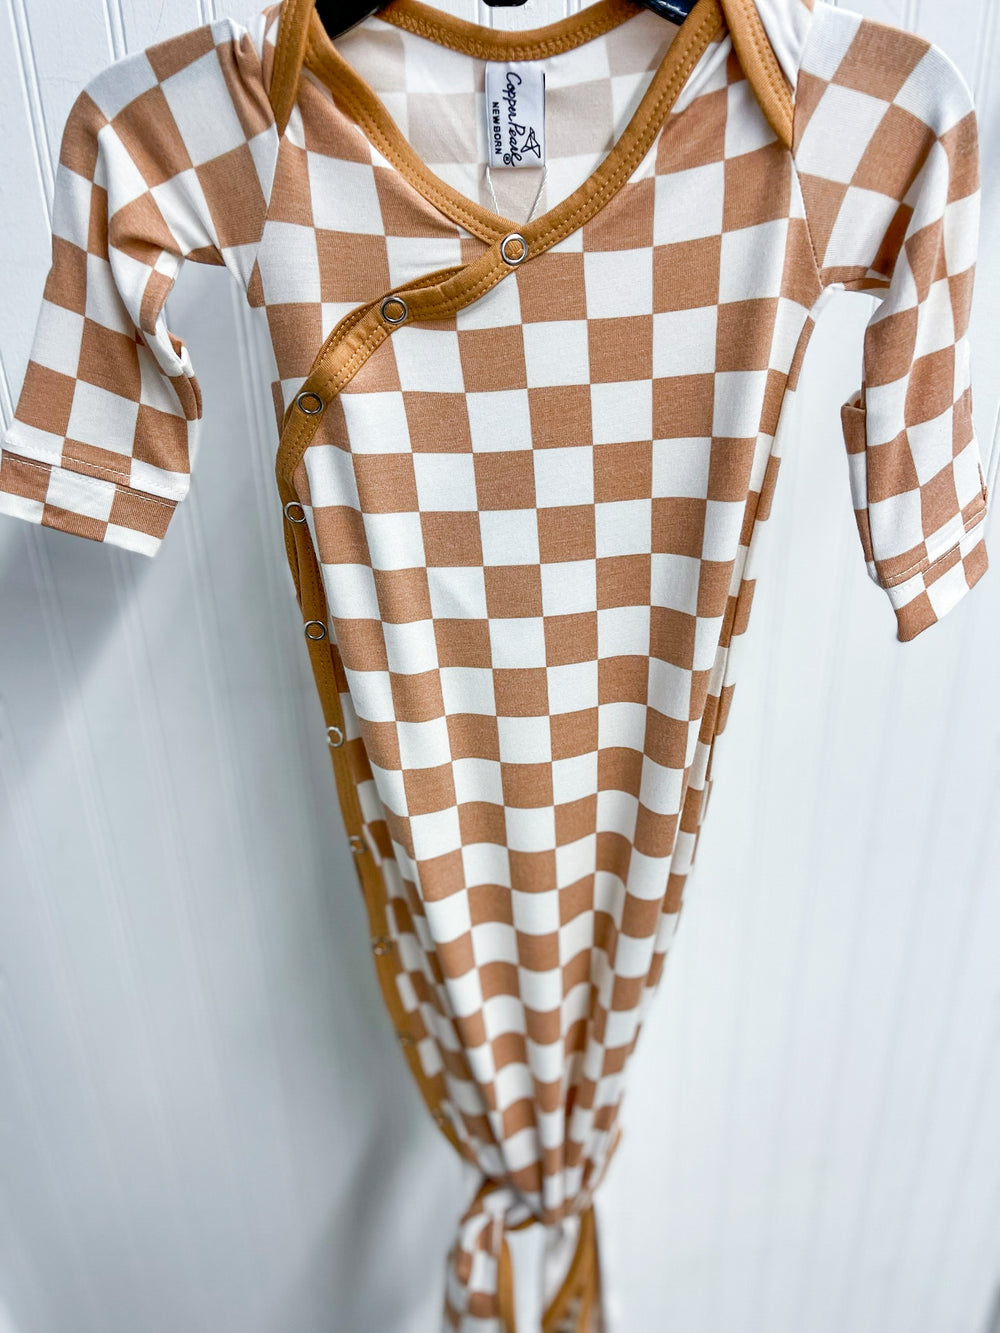 copper pearl knotted baby gown, rad print, brown and white checkered print, brown trim, snap button, knotted at the bottom so it can grow with baby. 